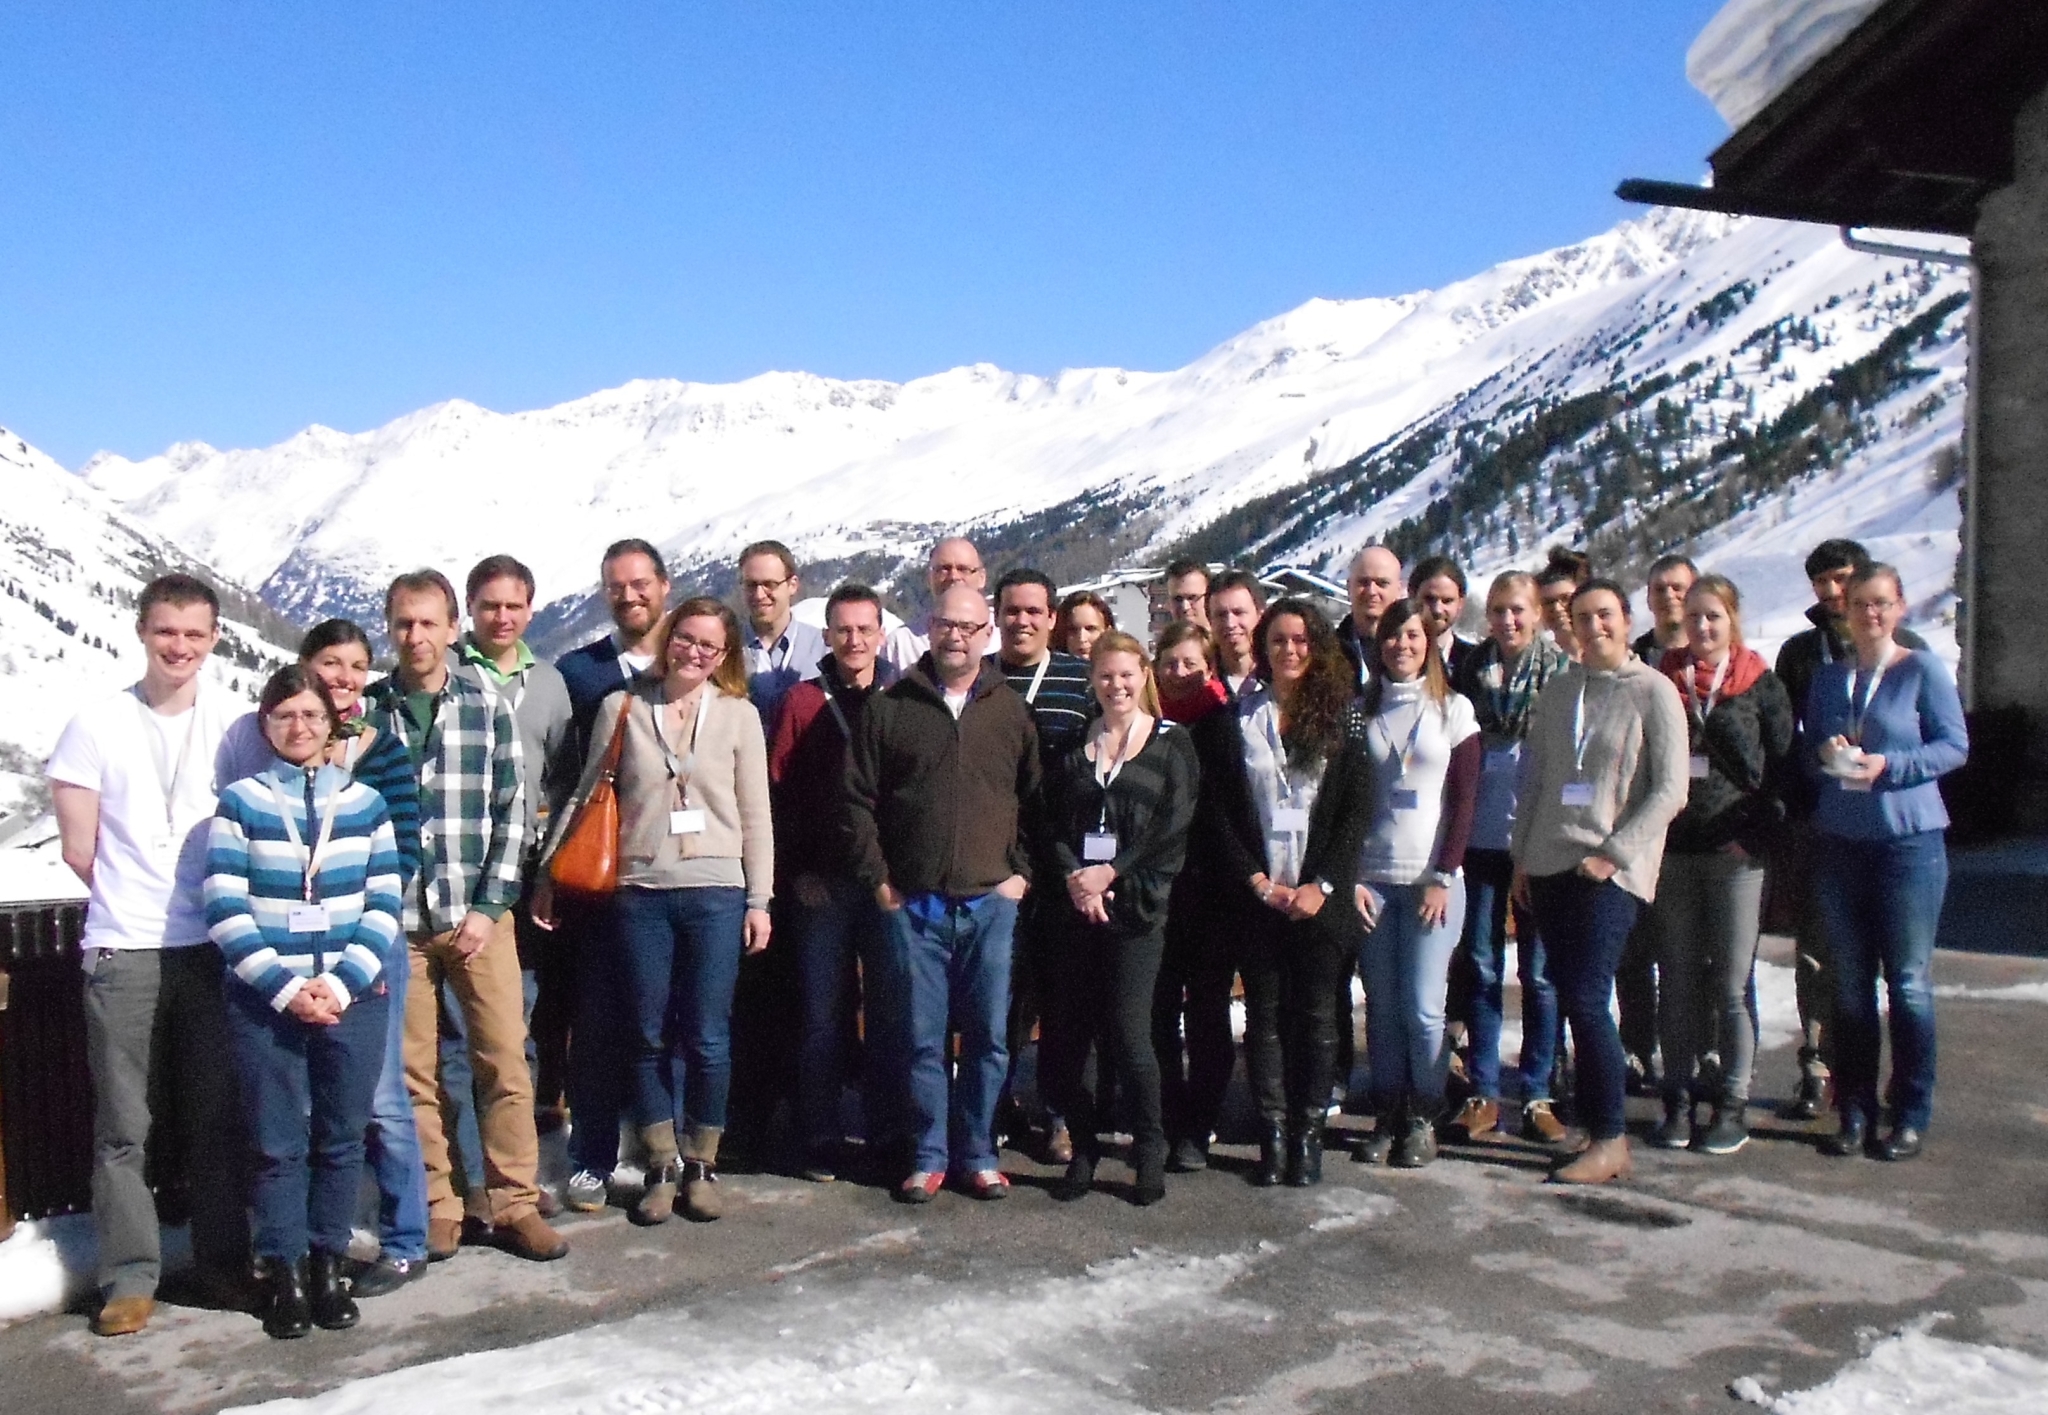 The photo shows the members of the international research group standing on a terrace and in front of a mountainous landscape close to the Austrian city of Obergurgl.